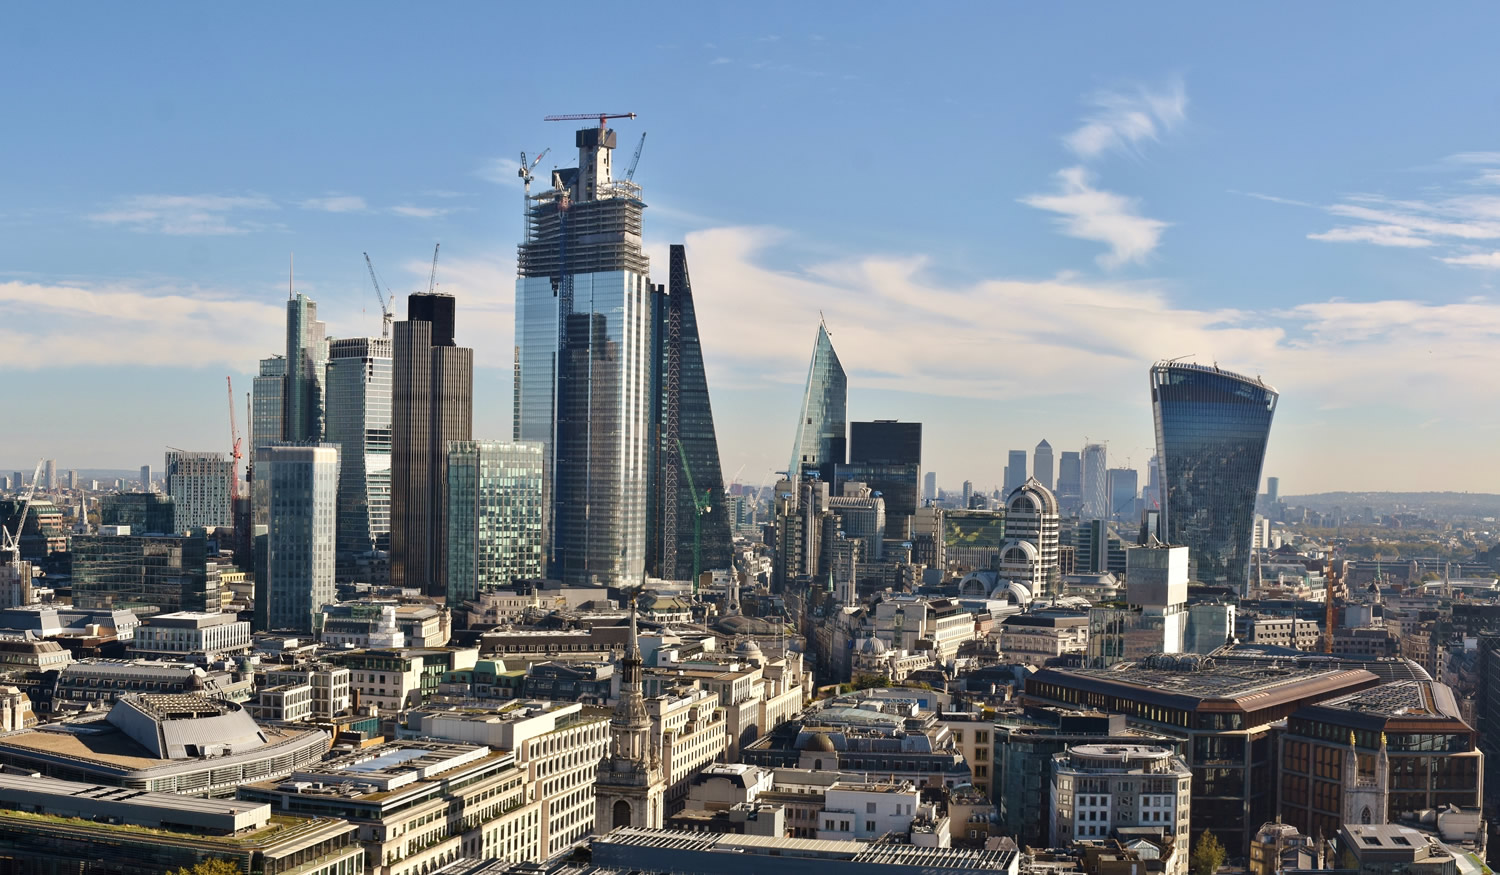 Prime central London property shows sign of recovery | London City ...